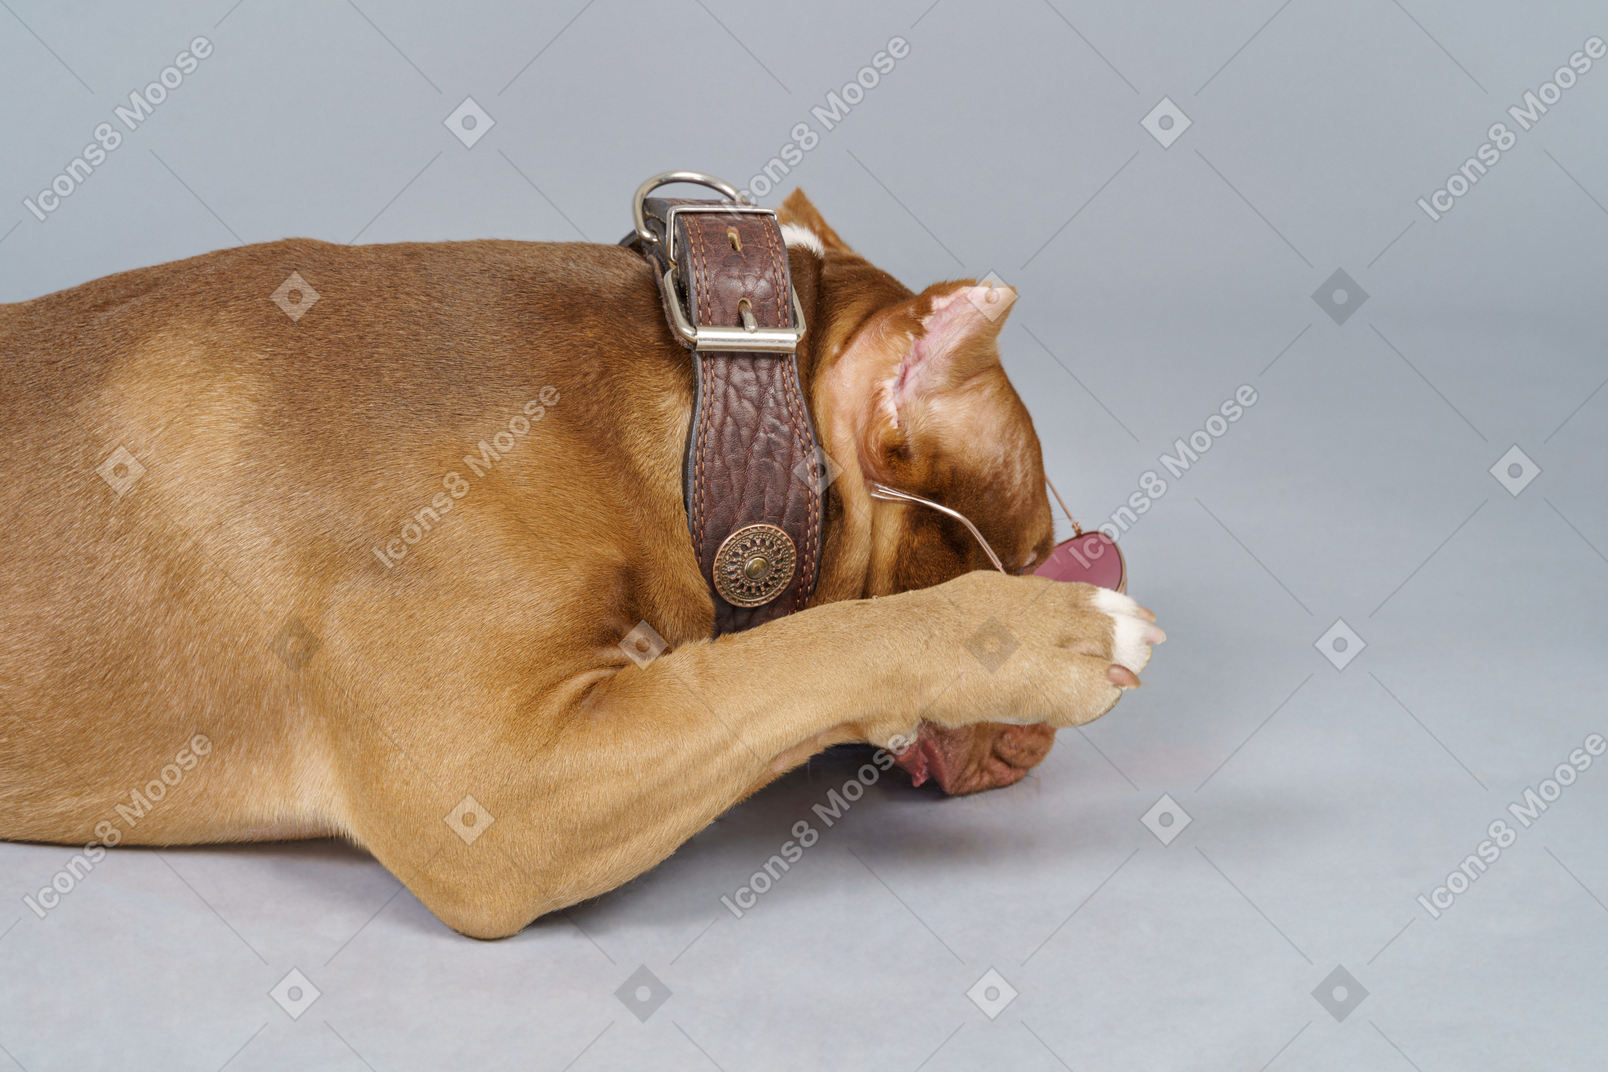 Side view of a brown bulldog wearing dog collar and hiding snout